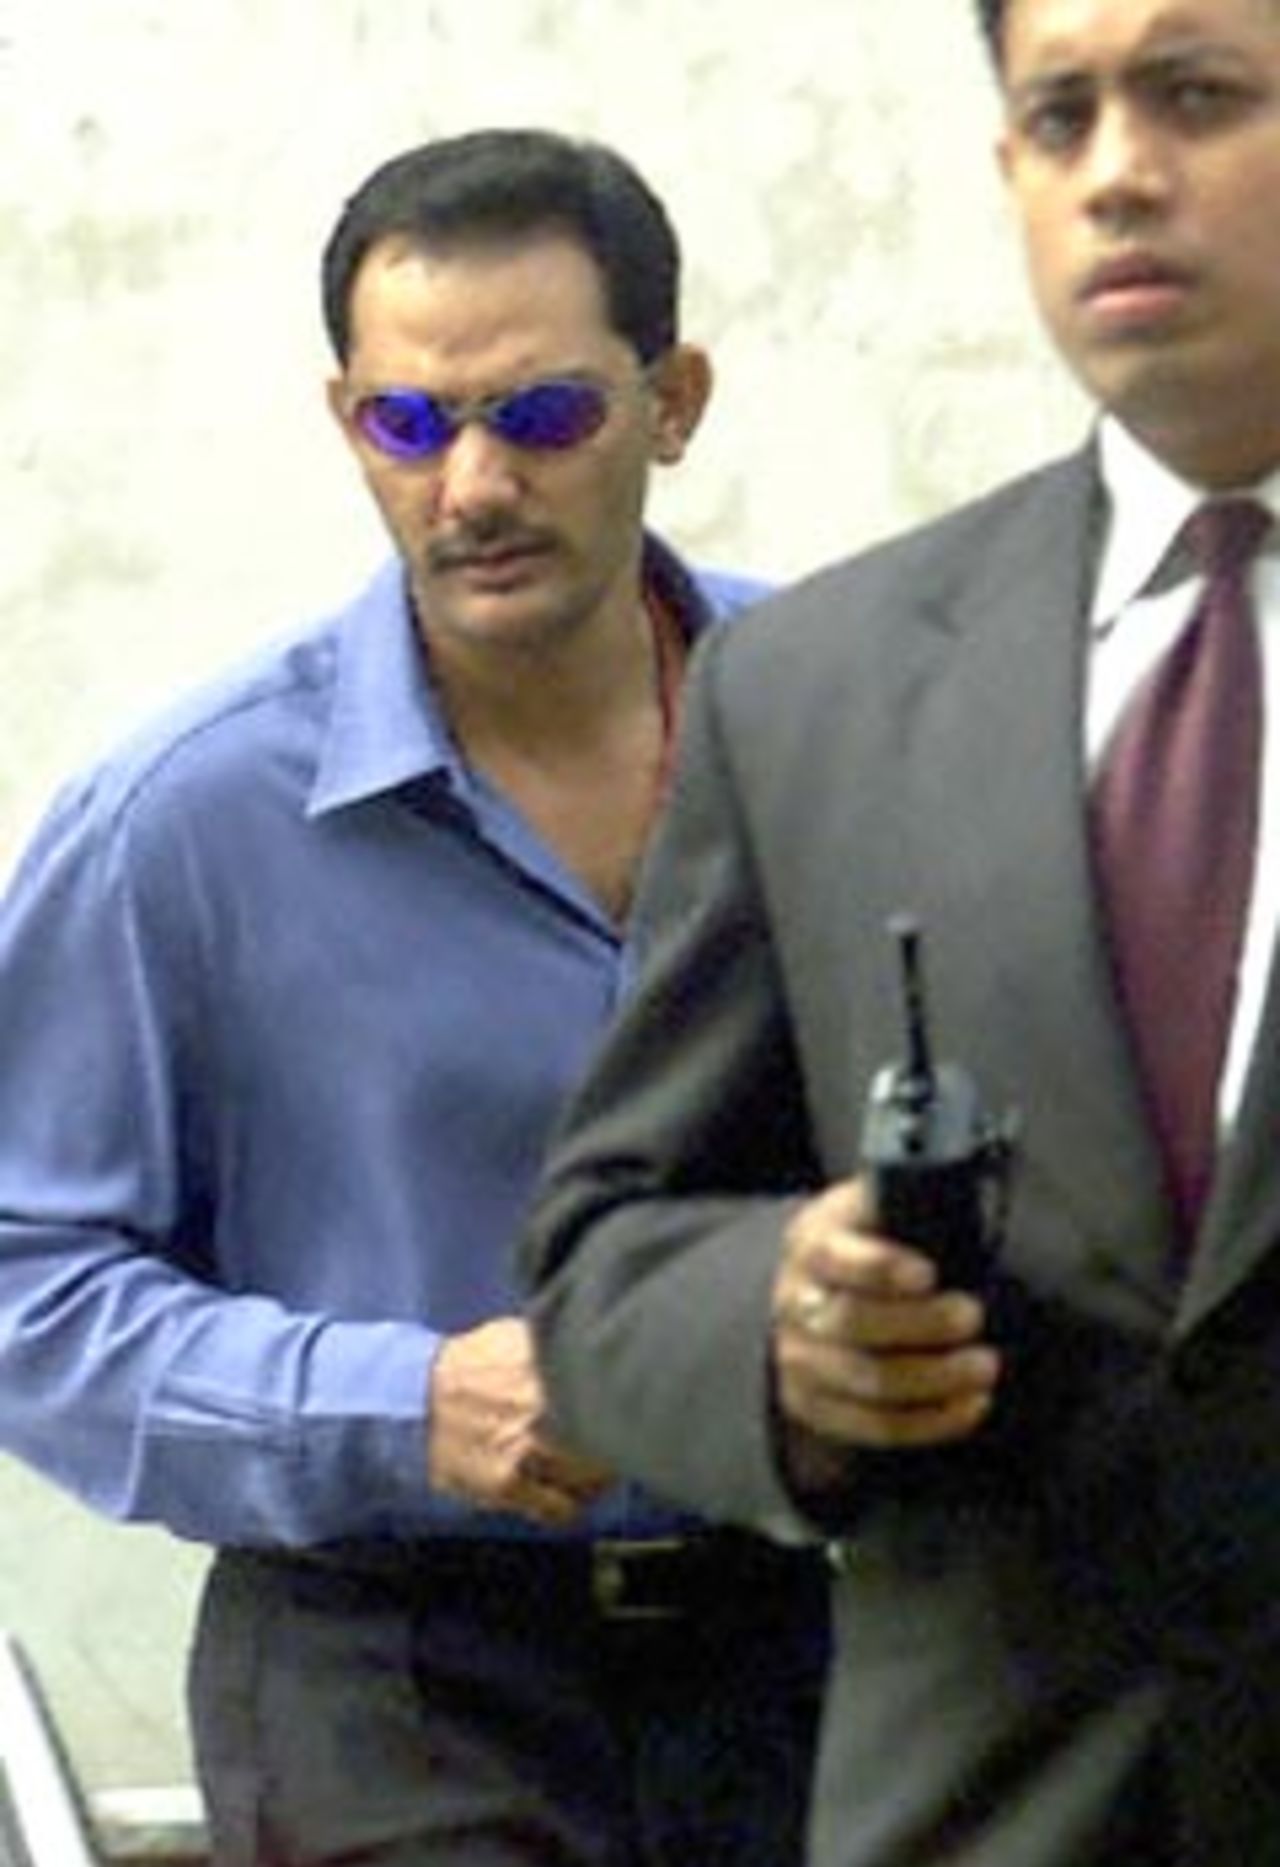 Former Indian cricket captain Mohammad Azharuddin (L) is accompanied by a security officer as  he leaves the staff entrance of the Taj Man Singh hotel following a last hearing with cricket board officials 28 November 2000. Azharuddin, could face a possible life ban for alleged match fixing.